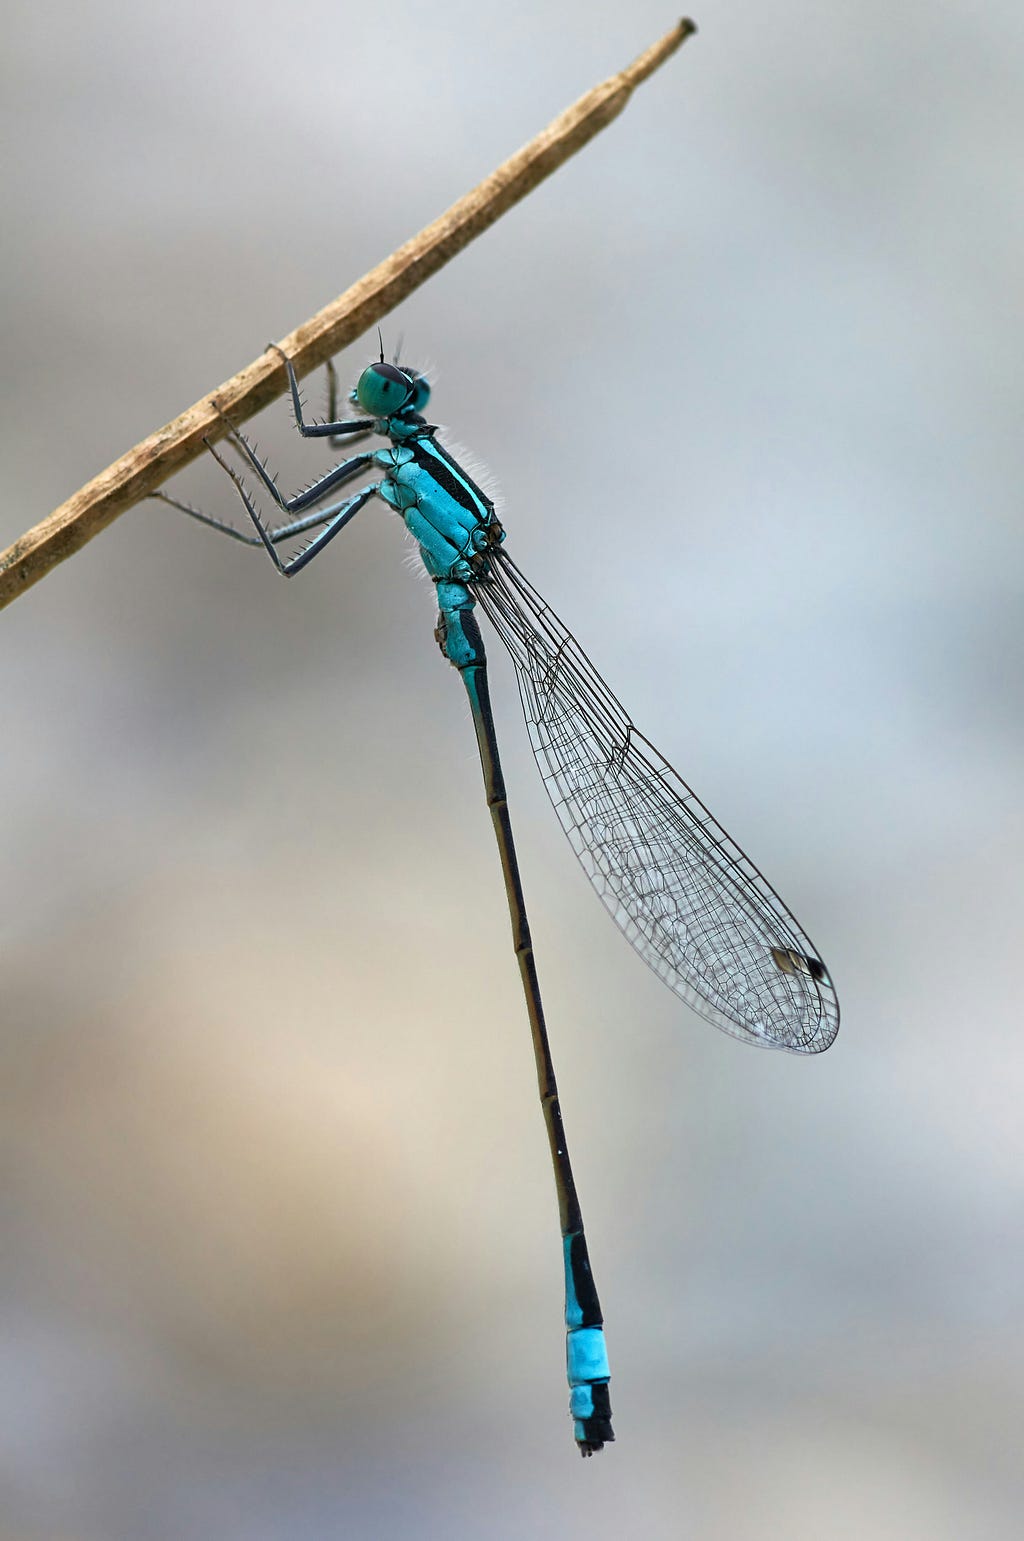 A turquoise and black dragonfly sits on a dry stalk. In profile, its wings look folded.